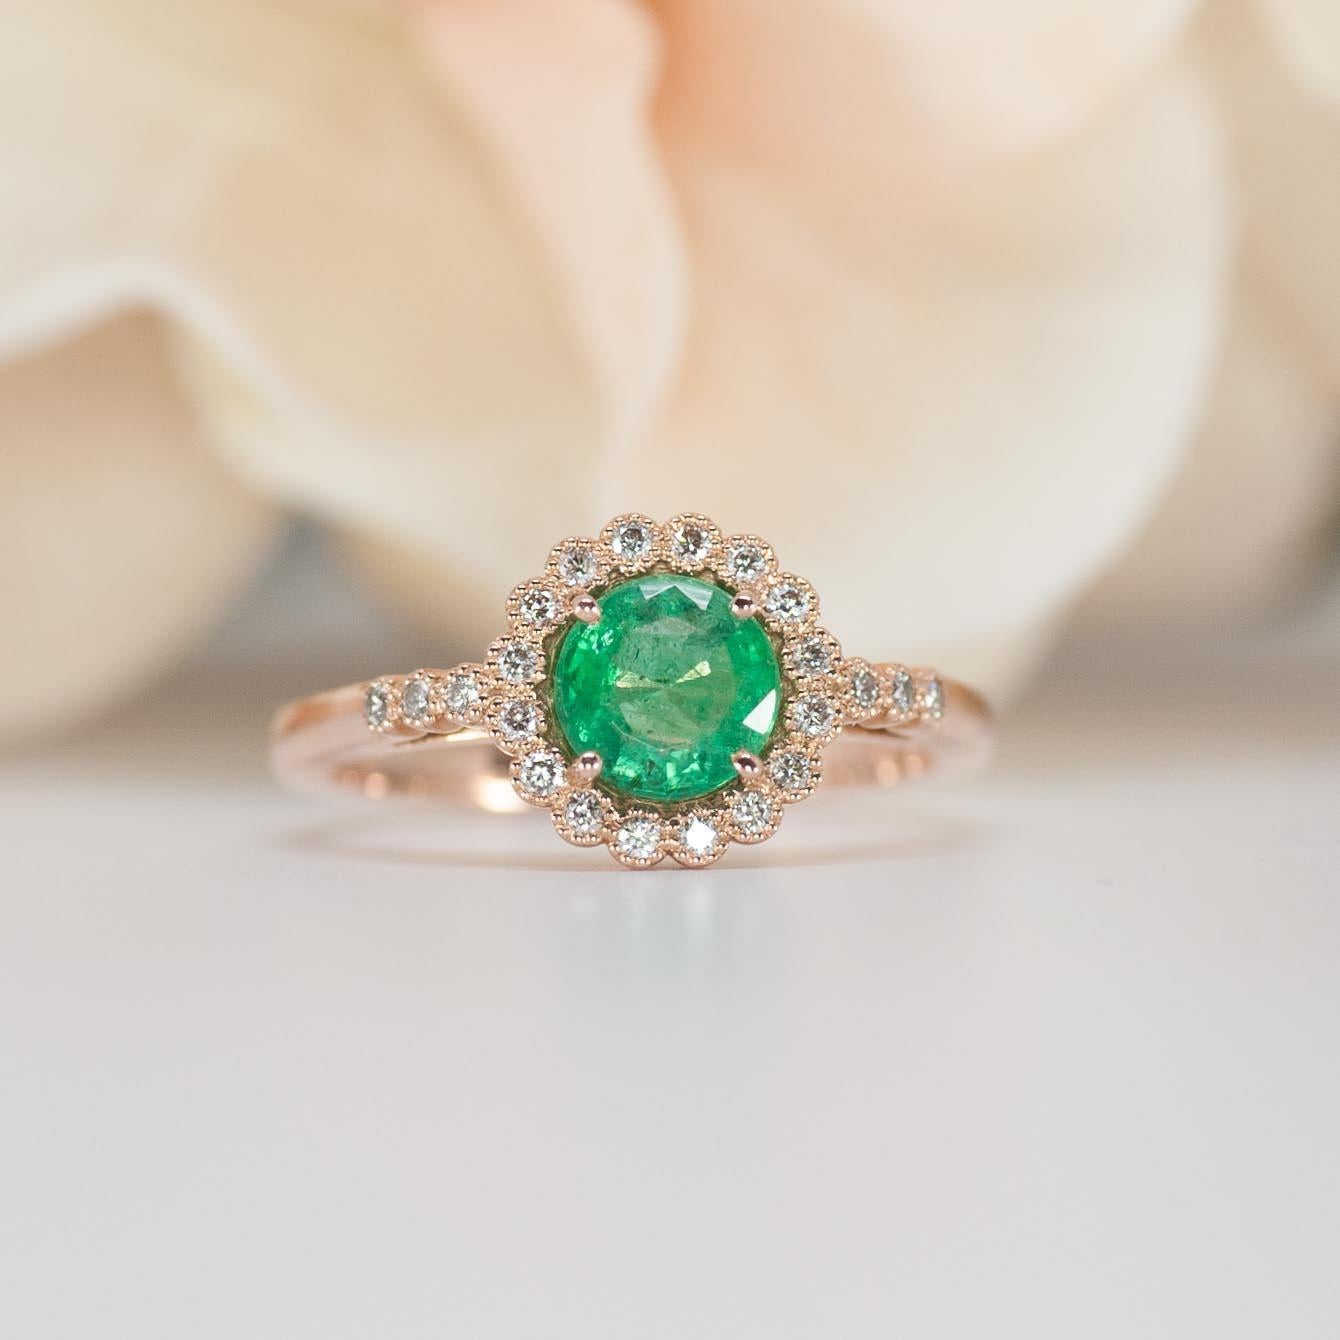 This vintage inspired emerald engagement ring offers a unique design with milgrain detail around the halo and band diamonds. 

♦♦♦Ring Information ♦♦♦

Center Stone:
* Natural Emerald
* Gemstone size: 6 mm Round Cut
* GIA Color & Clarity : Medium